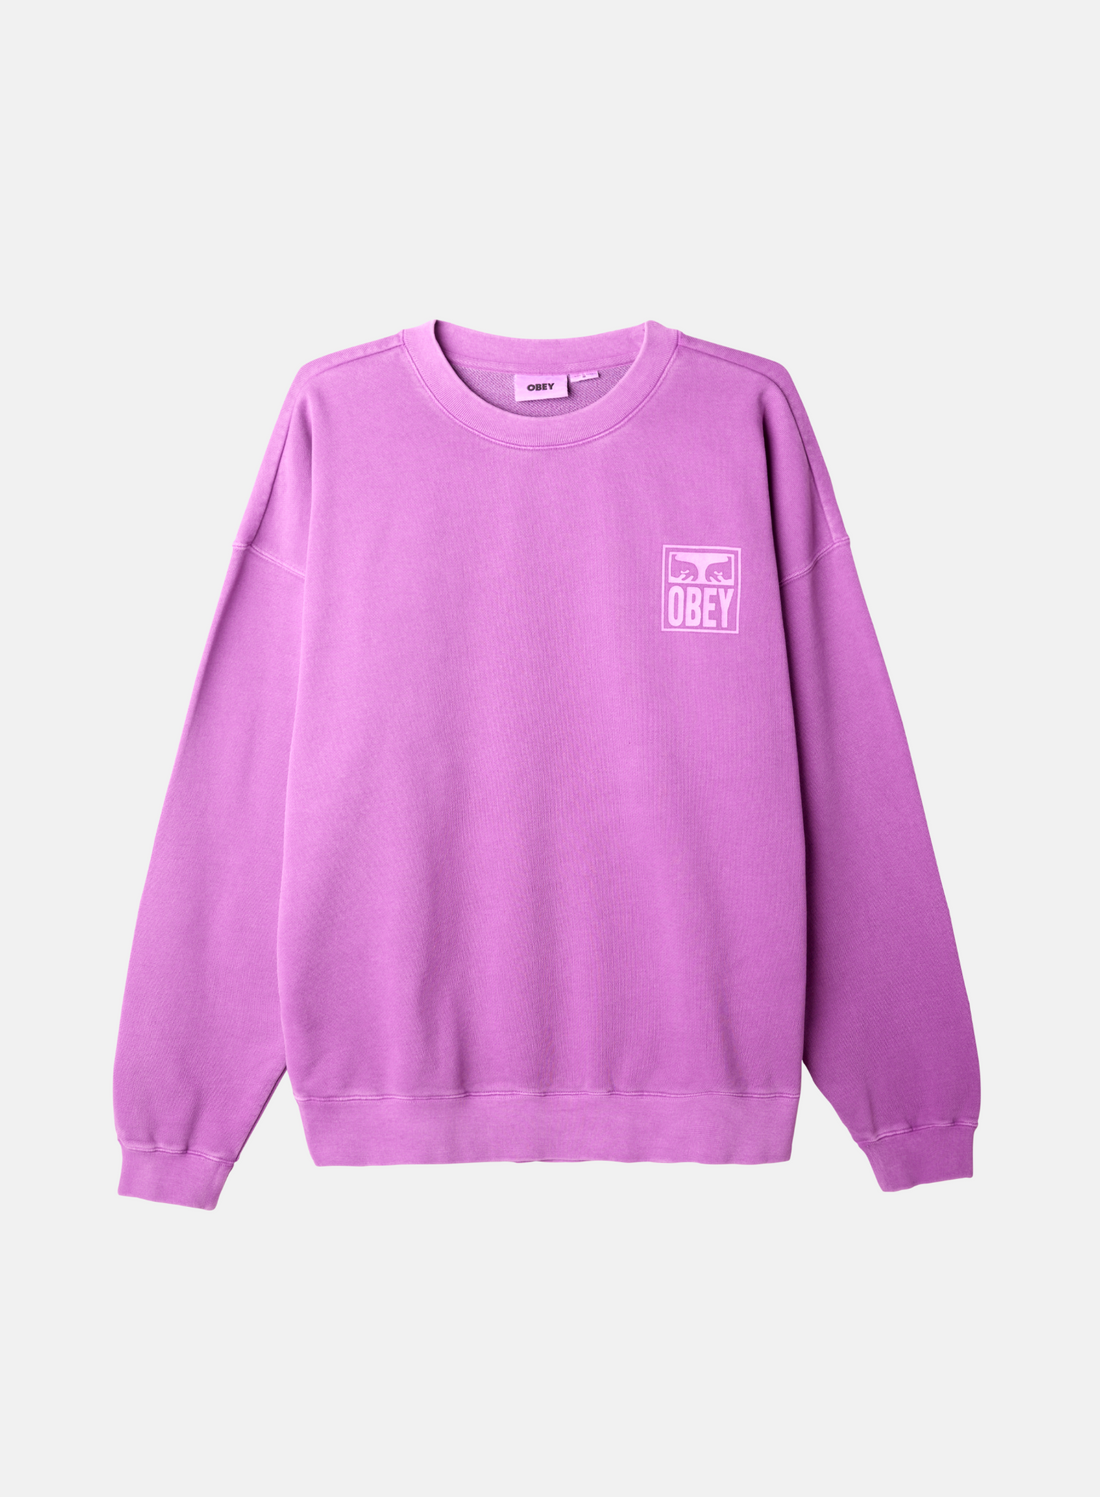 OBEY Icon Eyes Pig. Dyed Crewneck Pink - Hympala Store 